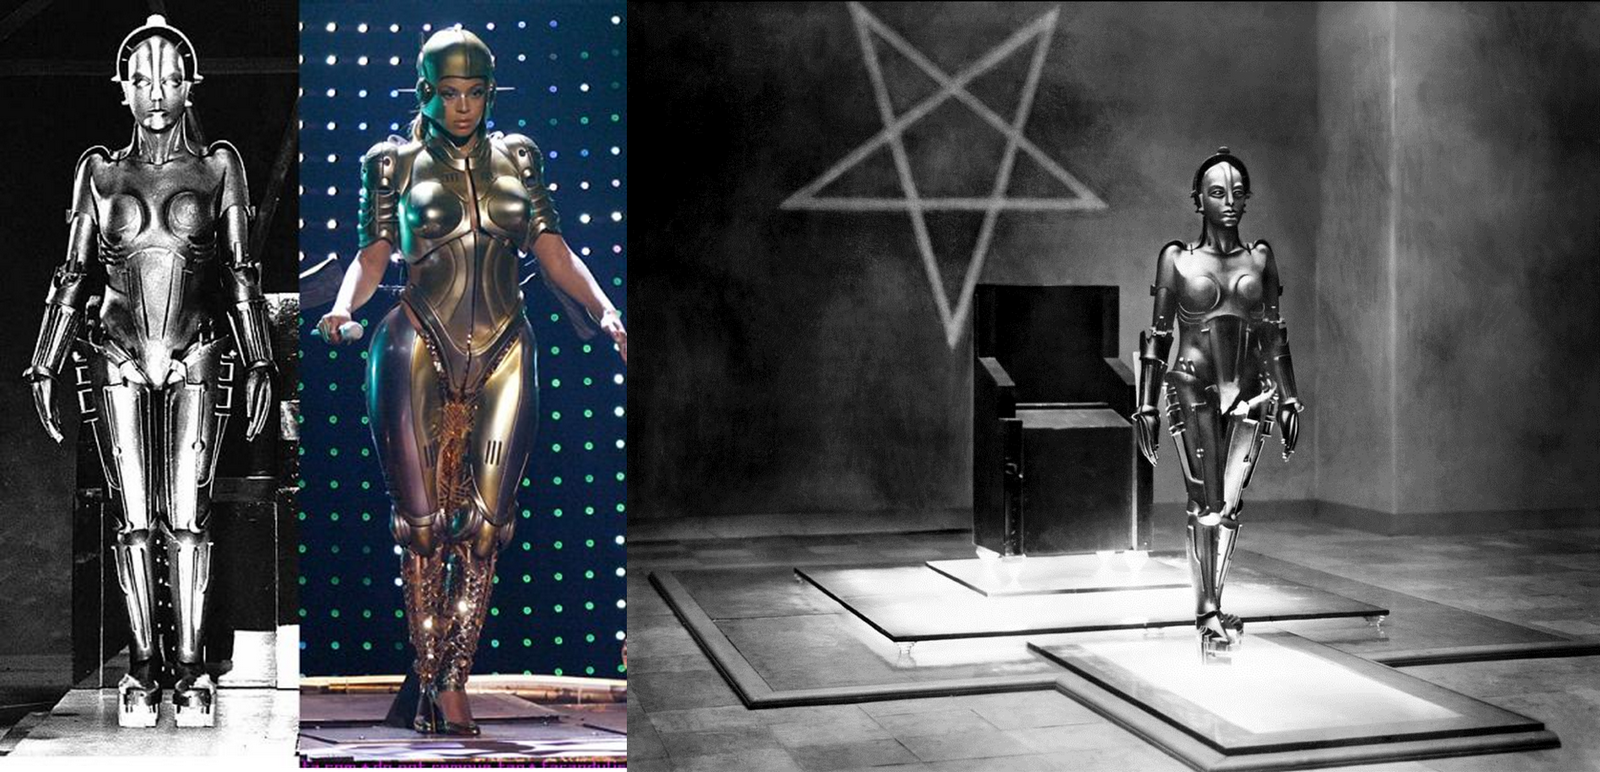 A pop star mimics a character from the old film Metropolis in which a woman was created to destroy men through sexual desire using entertainment.